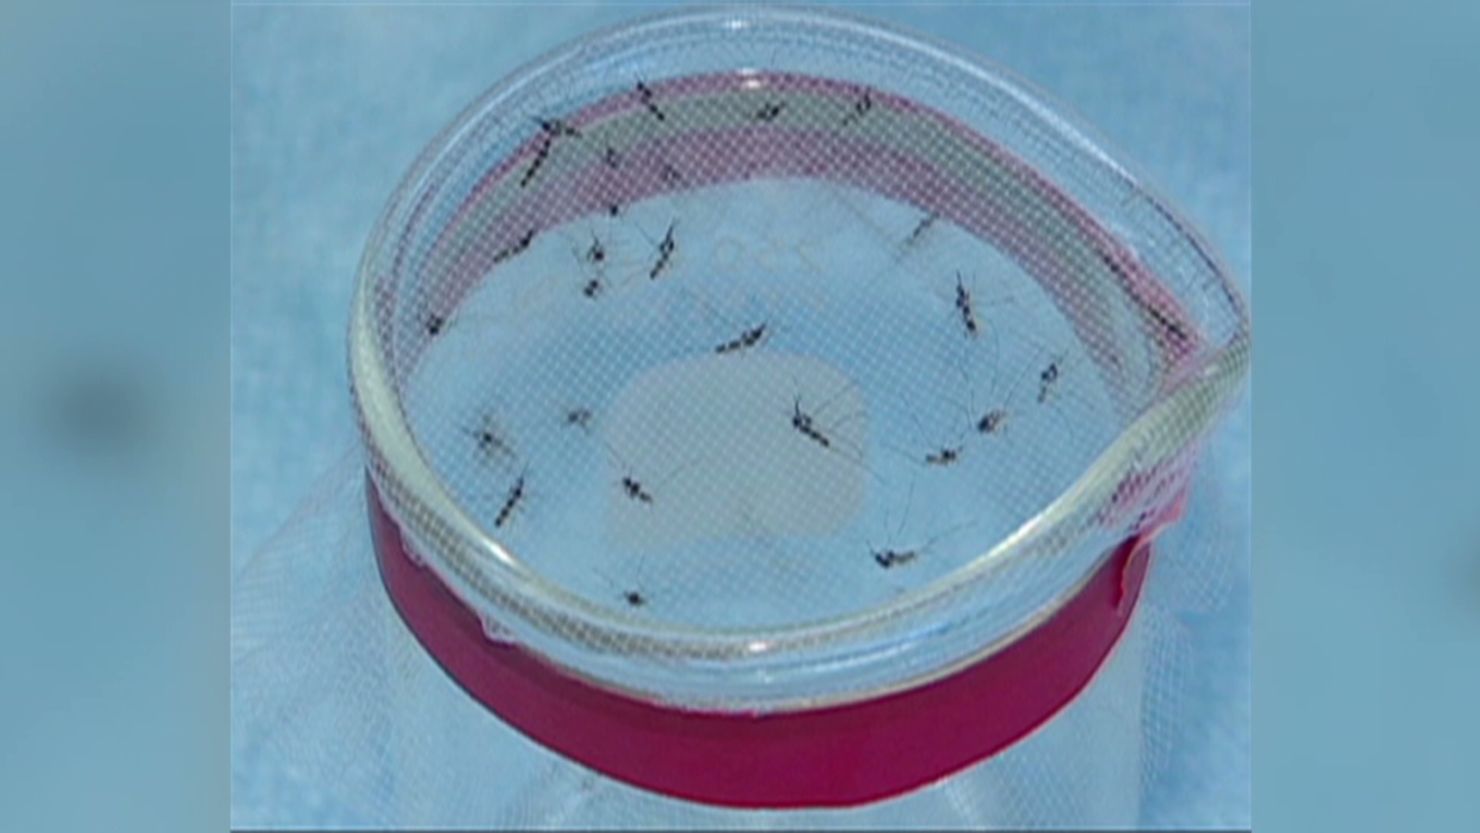 Health officials believe the worst of the West Nile epidemic is over for this year.